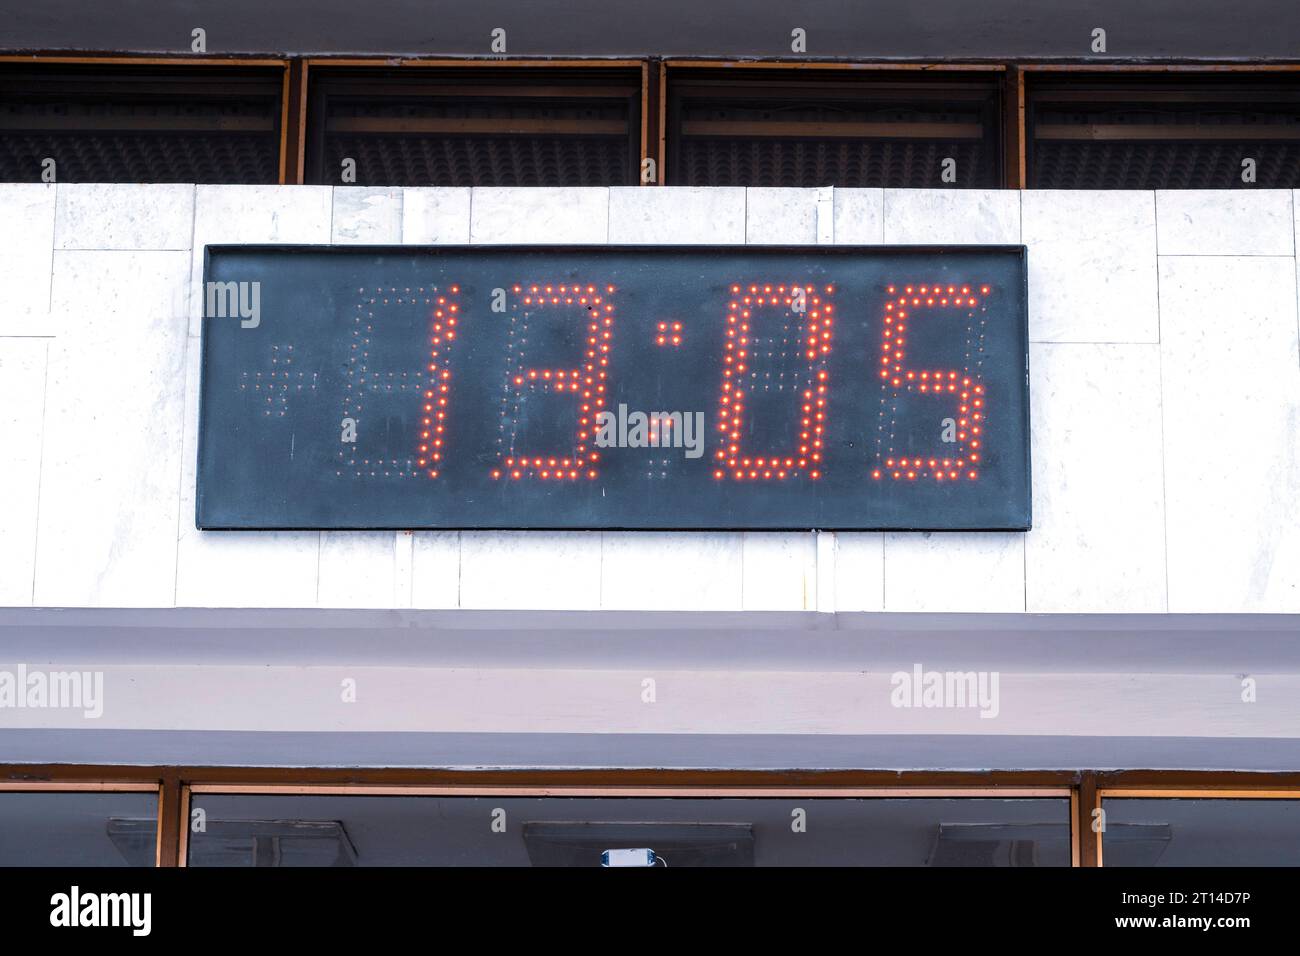 electronic board. Electronic watch, Digital  scoreboard. The concept of time, the beginning. Stock Photo